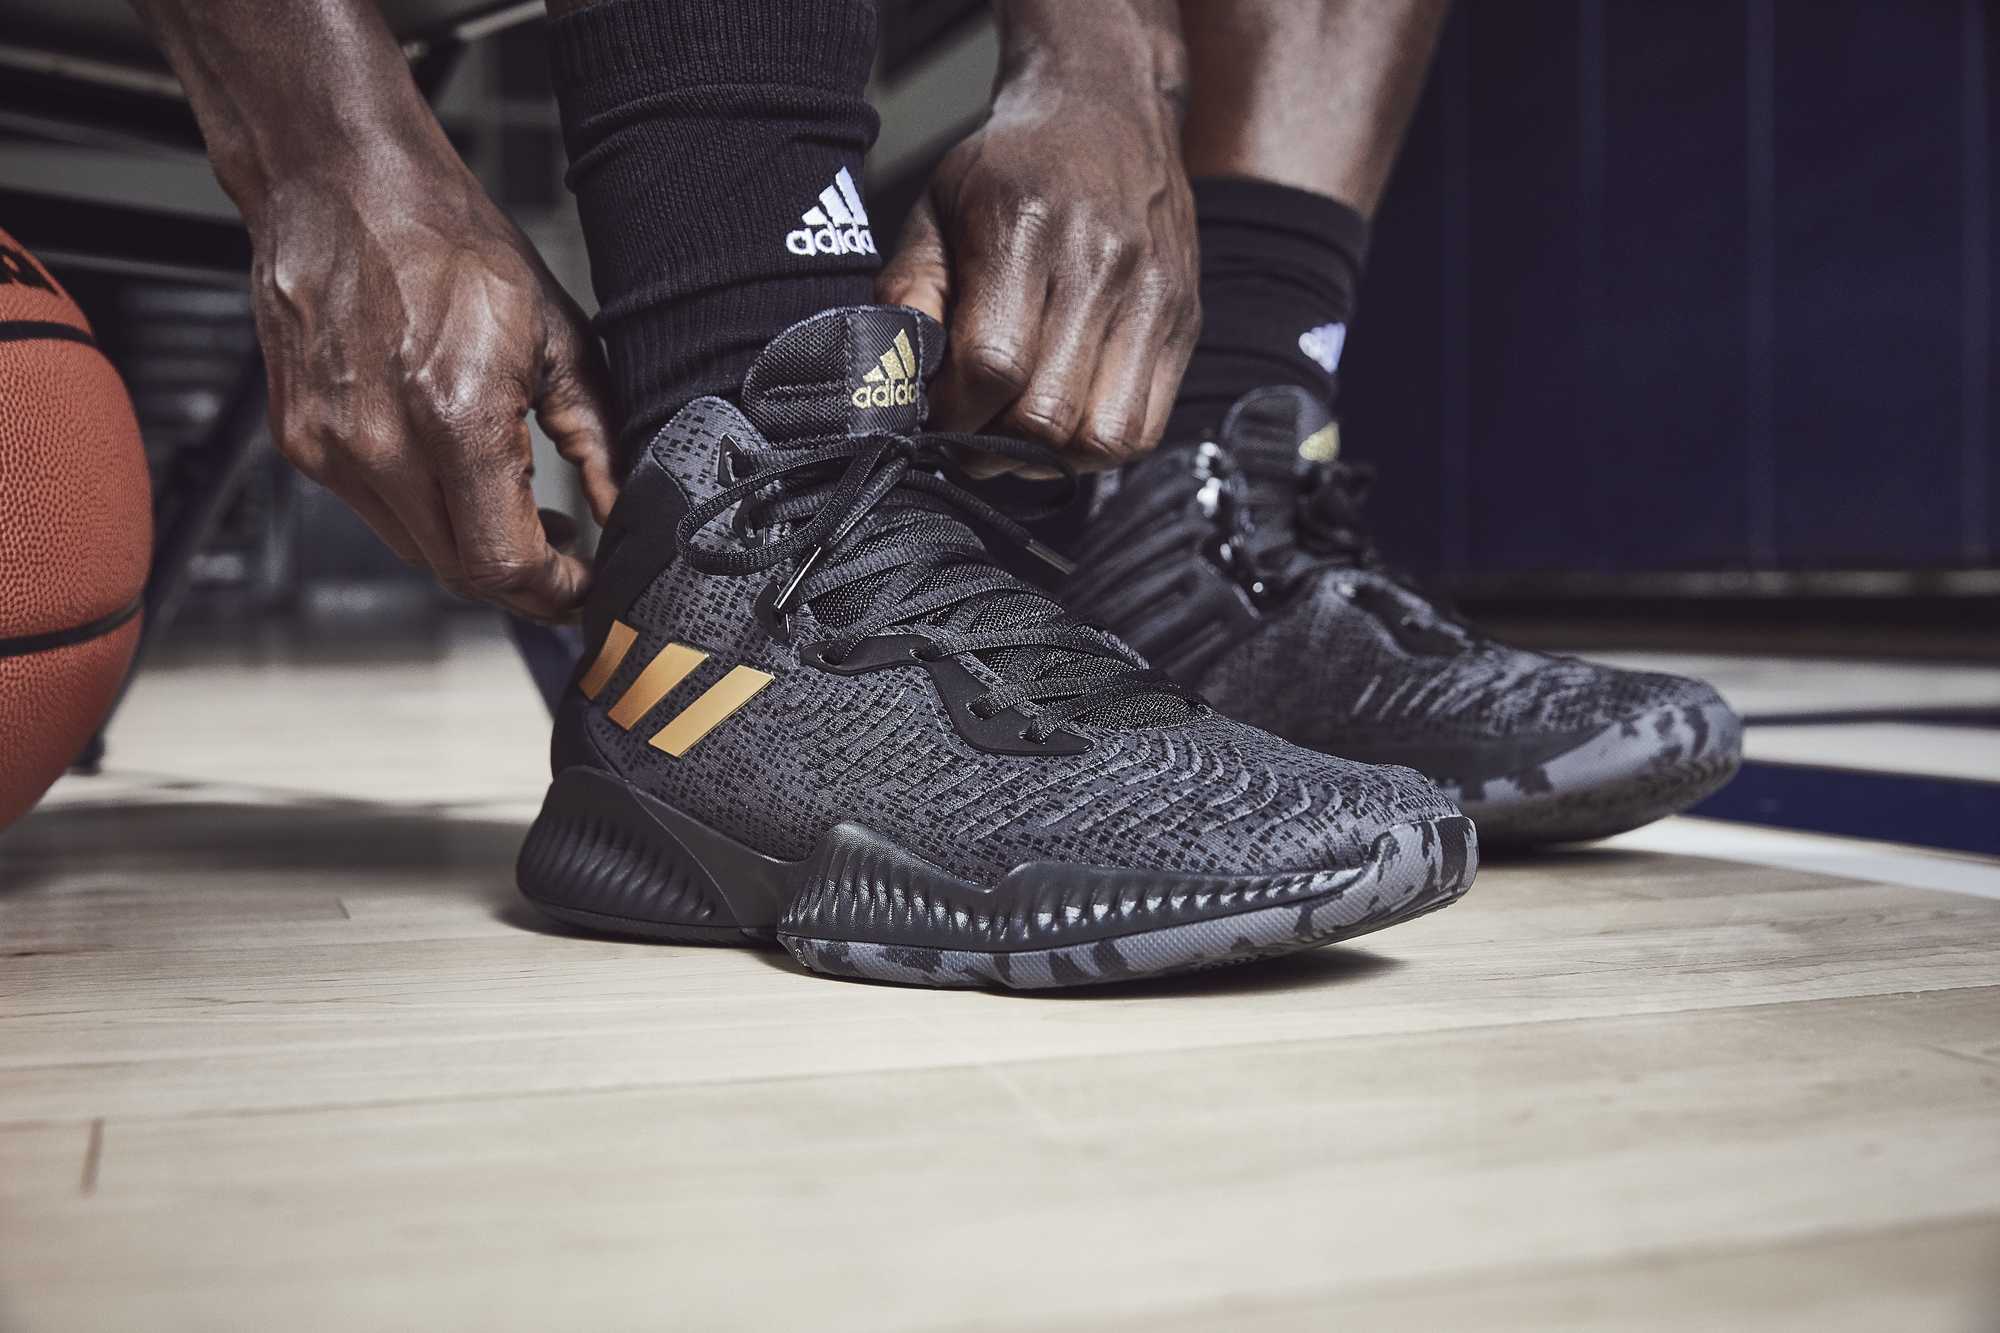 What Pros Wear: Joel Embiid's Adidas Mad Bounce Shoes - What Pros Wear